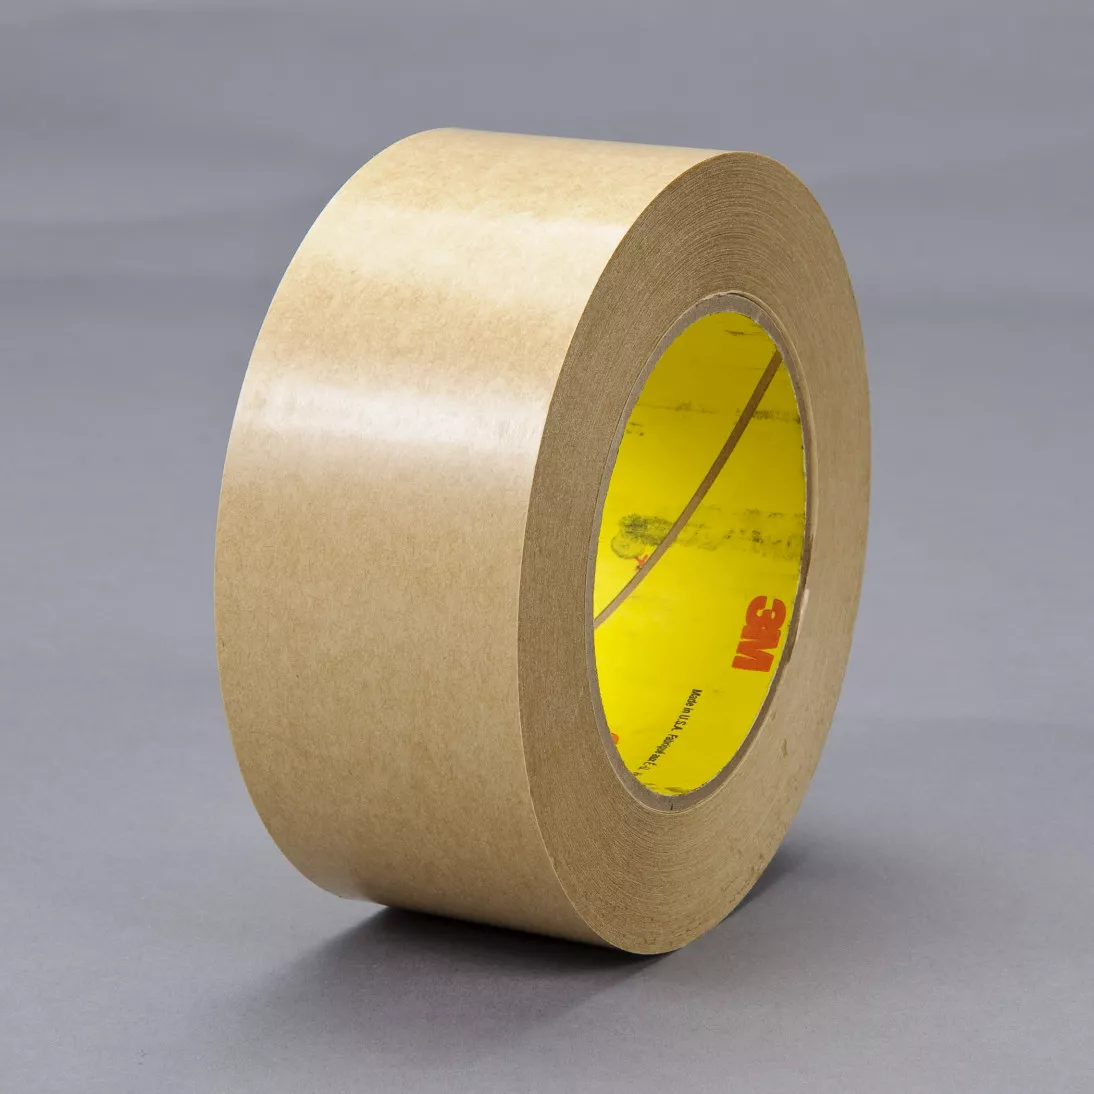 3M™ Adhesive Transfer Tape 465, Clear, 3/8 in x 60 yd, 2 mil, 96 rolls
per case